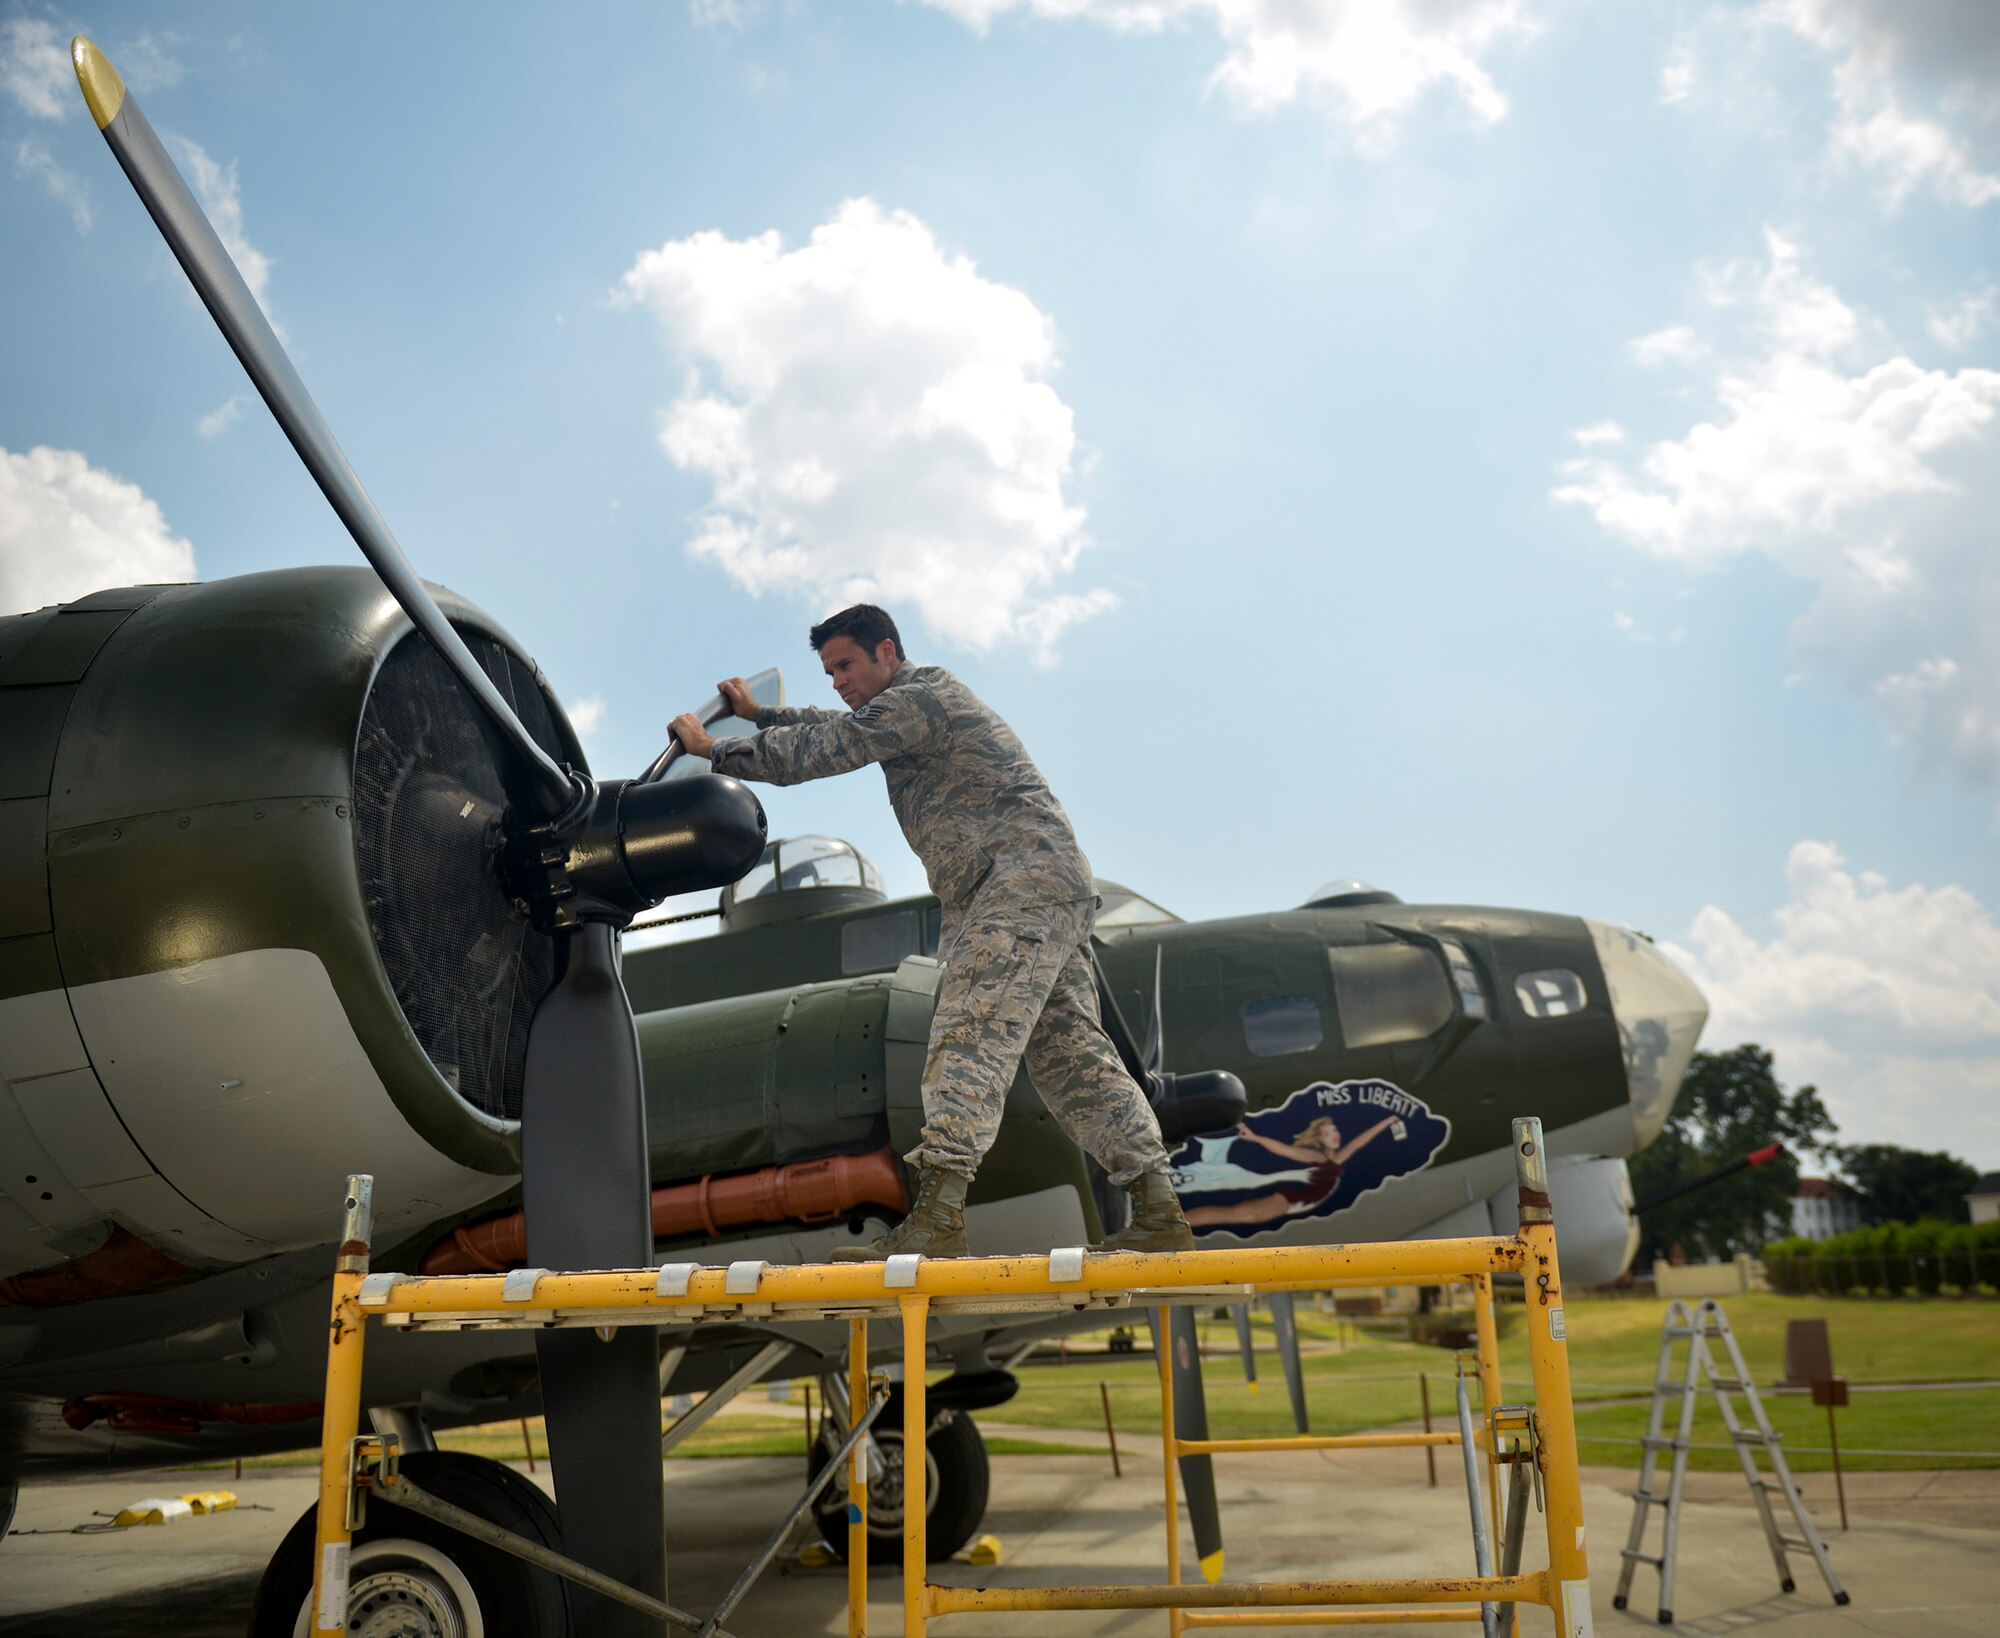 Tech Sgt. Garrett Hulett, Barksdale Global Power Musuem Non-Commissioned Officer in Charge, performs maintenance on the museum’s B-17 Flying Fortress. Hulett maintains the air park’s 20 static displays, including 17 aircraft that span from a World War II B-24 Liberator to an SR-71 Blackbird. (U.S. Air Force photo/Airman 1st Class Mozer O. Da Cunha)